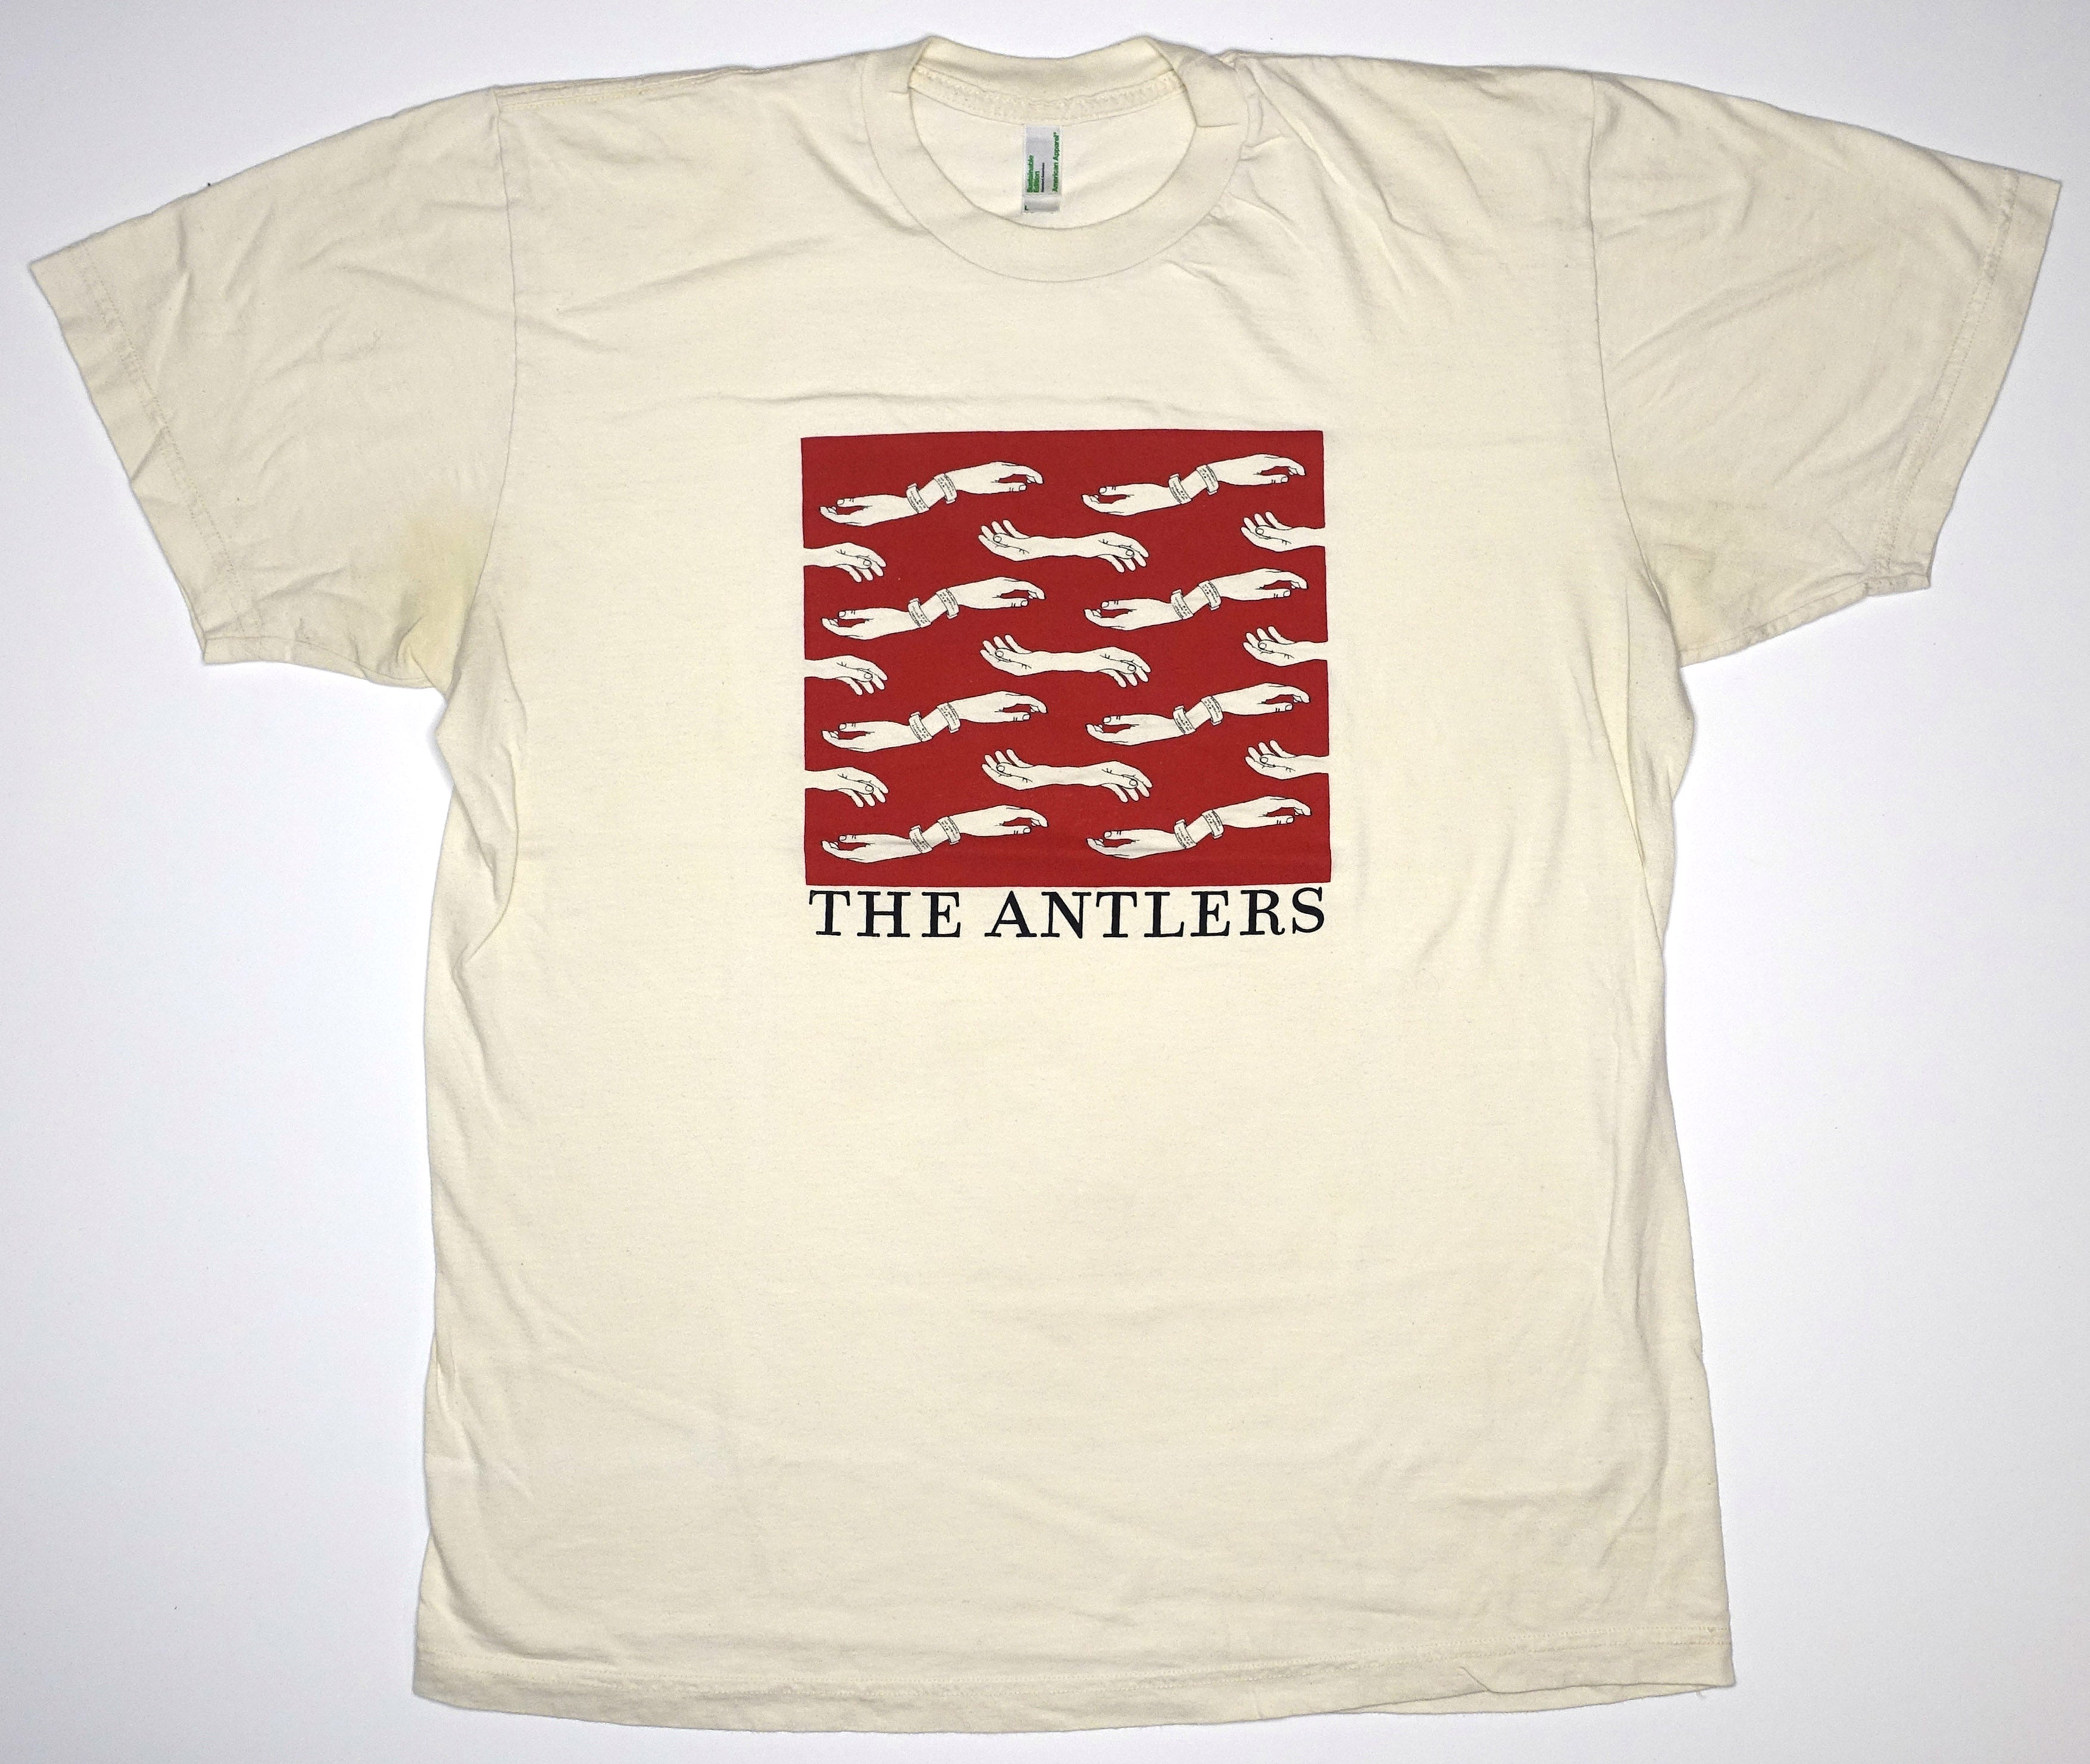 the Antlers – Hospice 2009 Tour Shirt Size Large